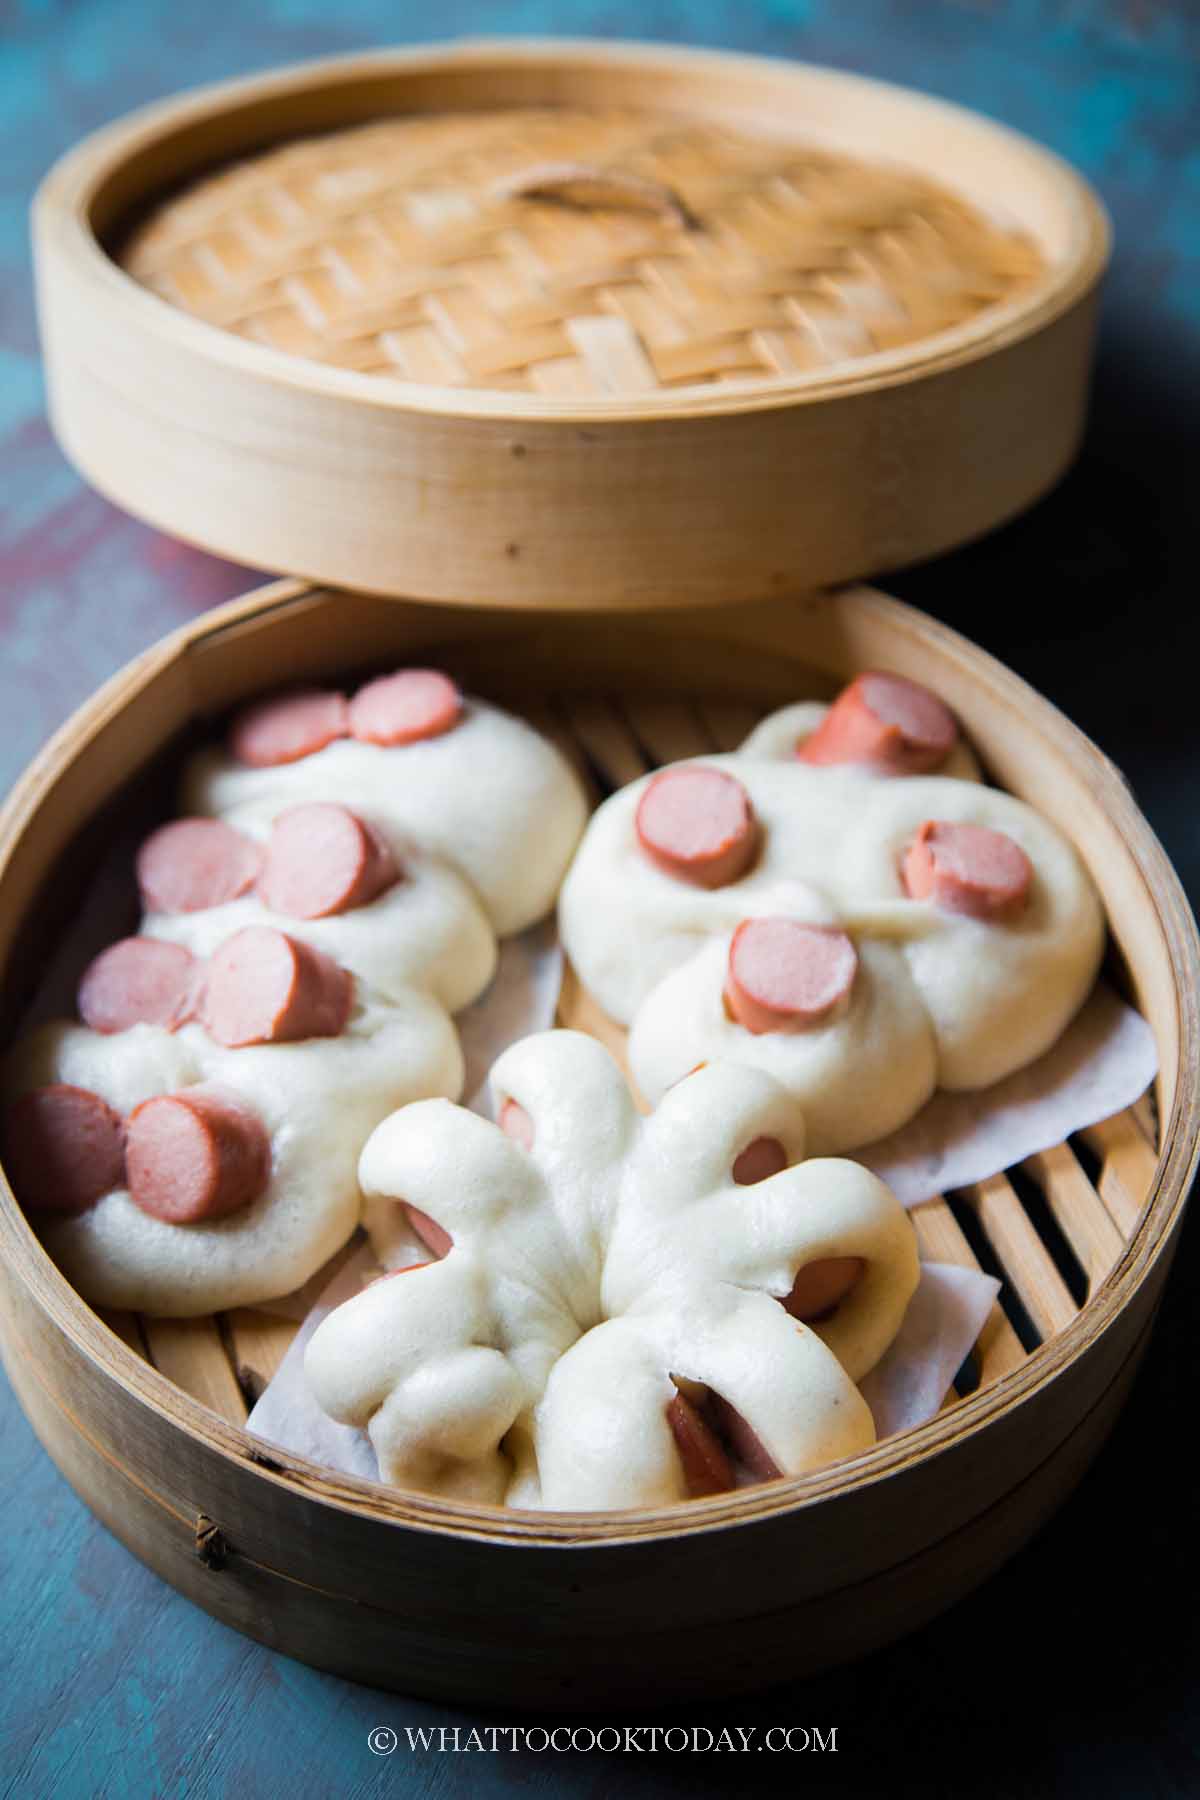 Sausage Steamed Buns / Sausage Bao (with different designs)